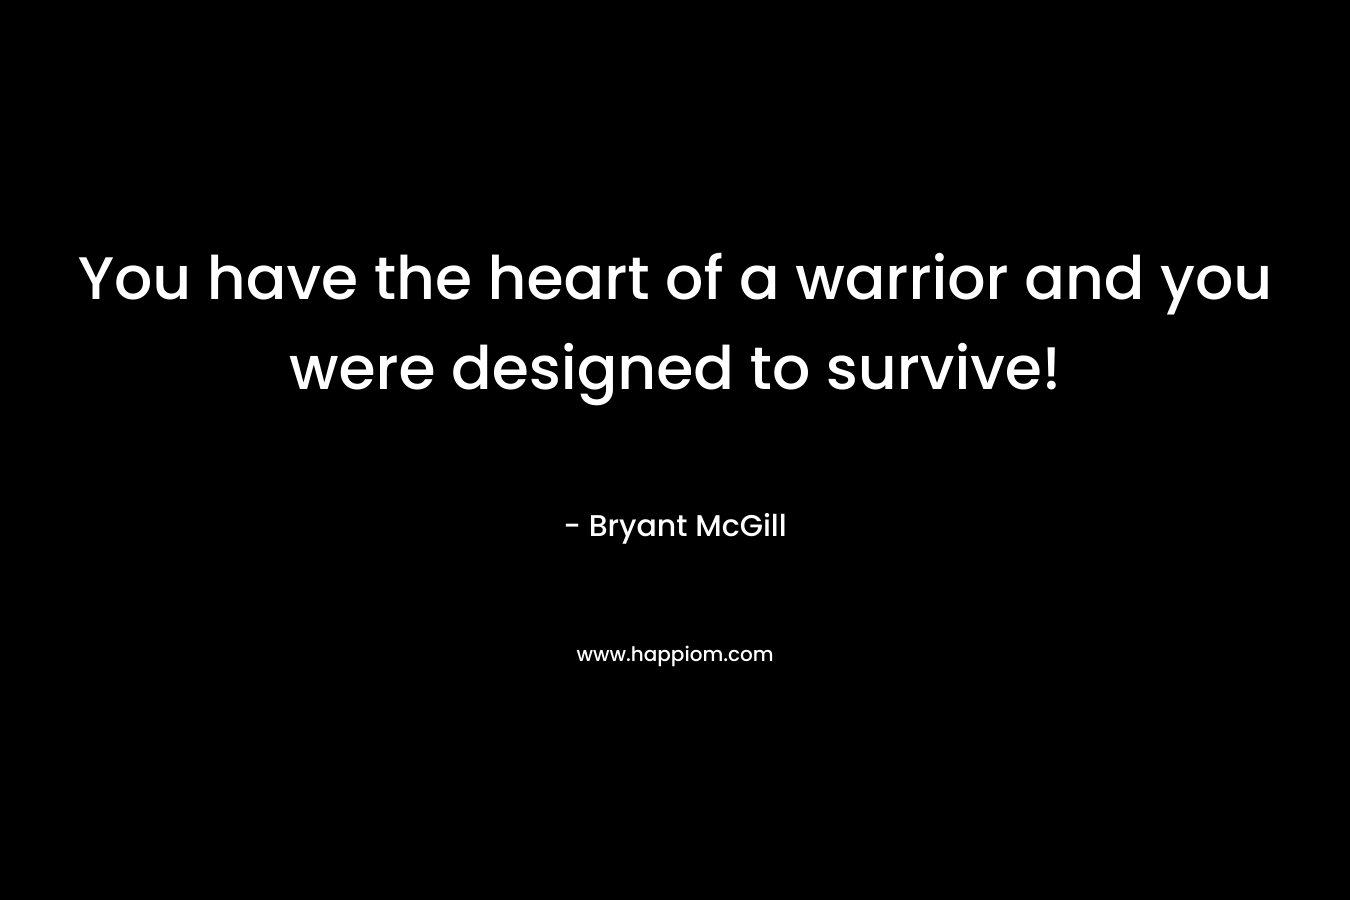 You have the heart of a warrior and you were designed to survive!